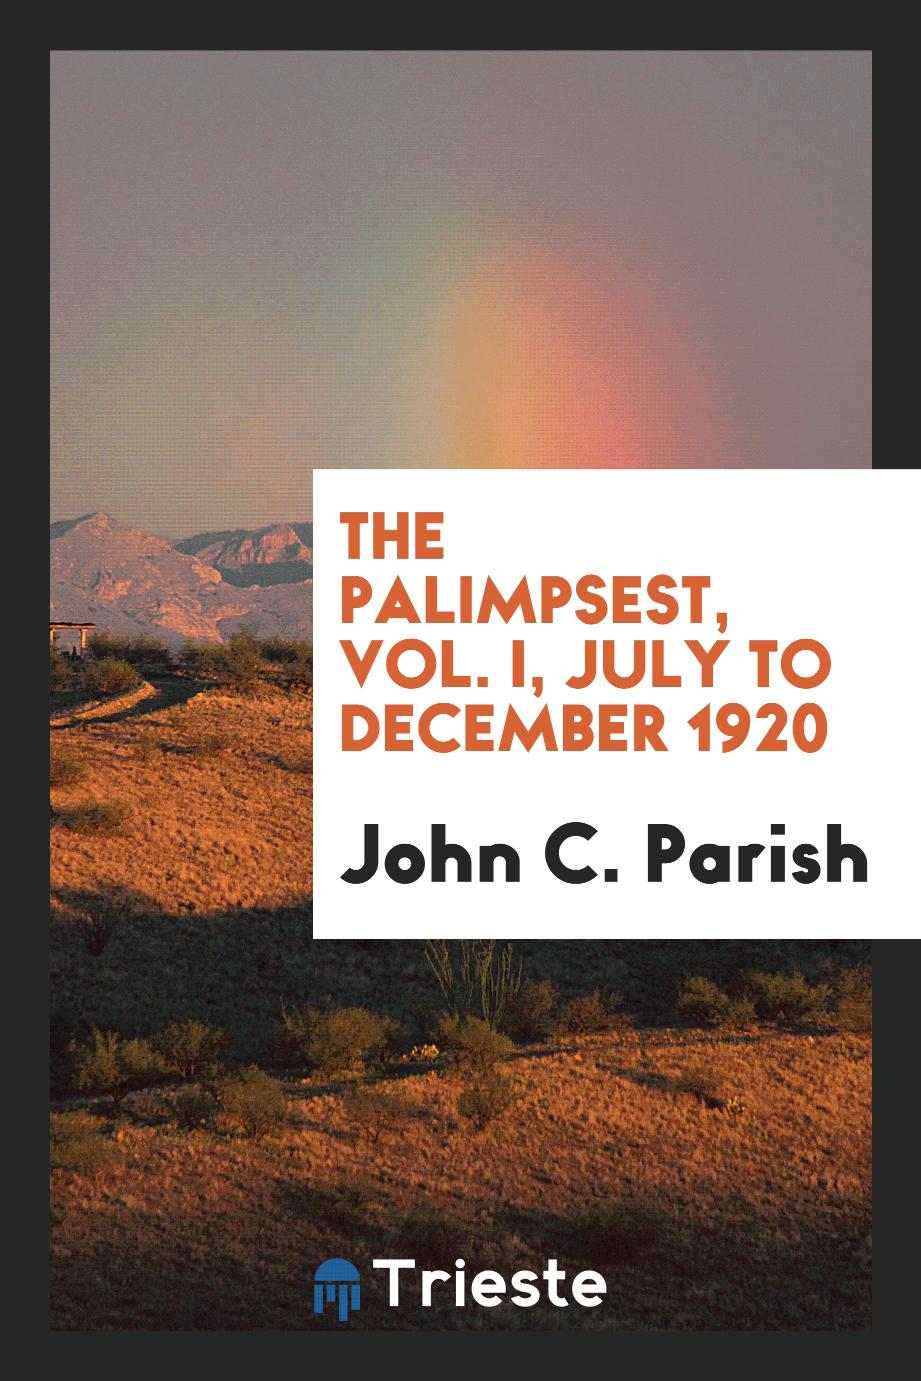 The Palimpsest, Vol. I, July to December 1920